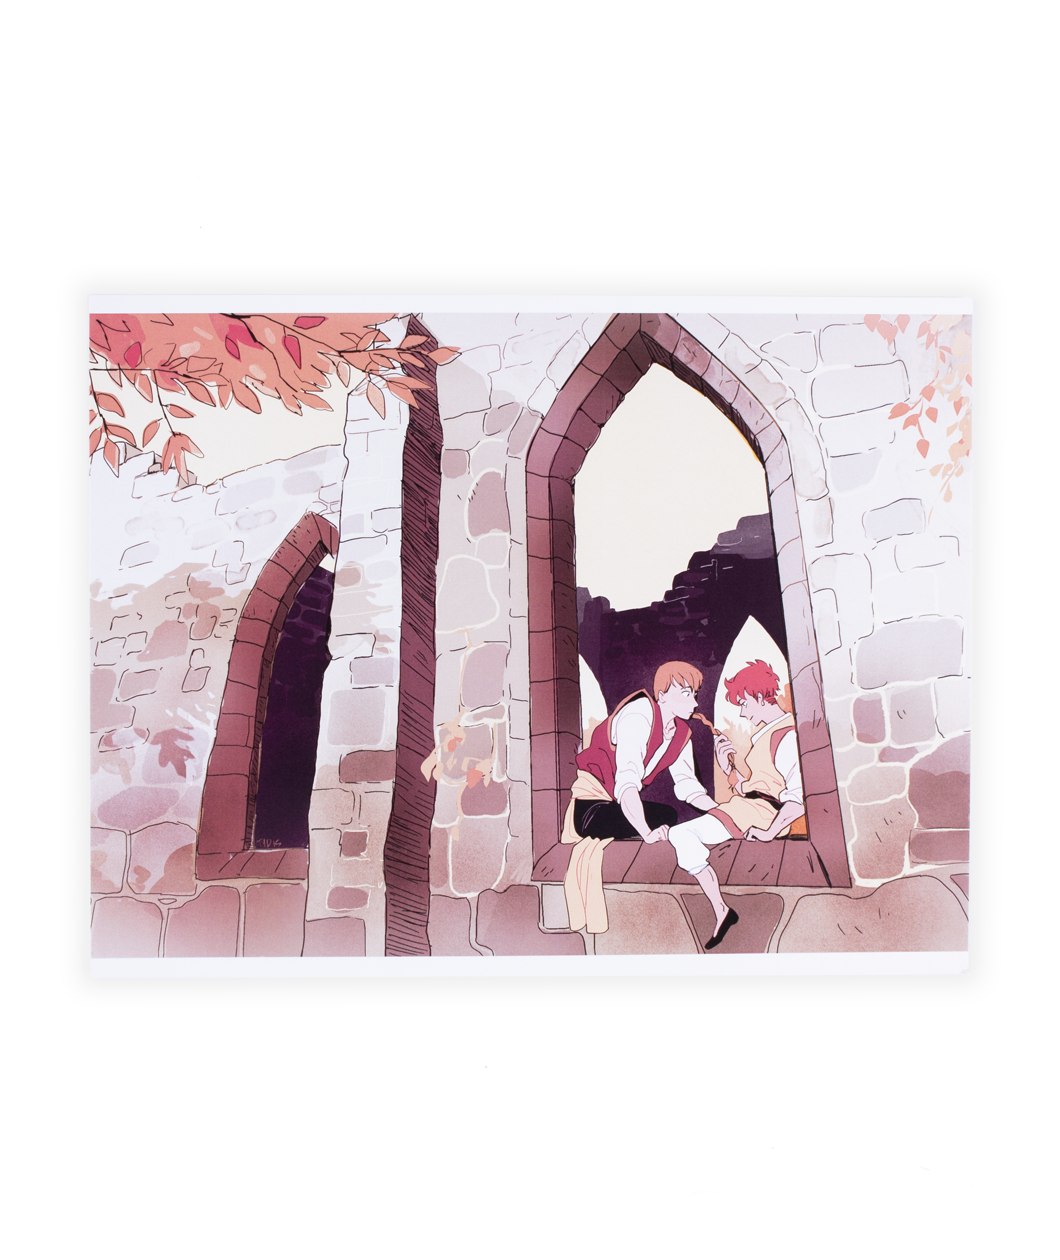 A scene of two people talking in an archway of brick building during fall. 